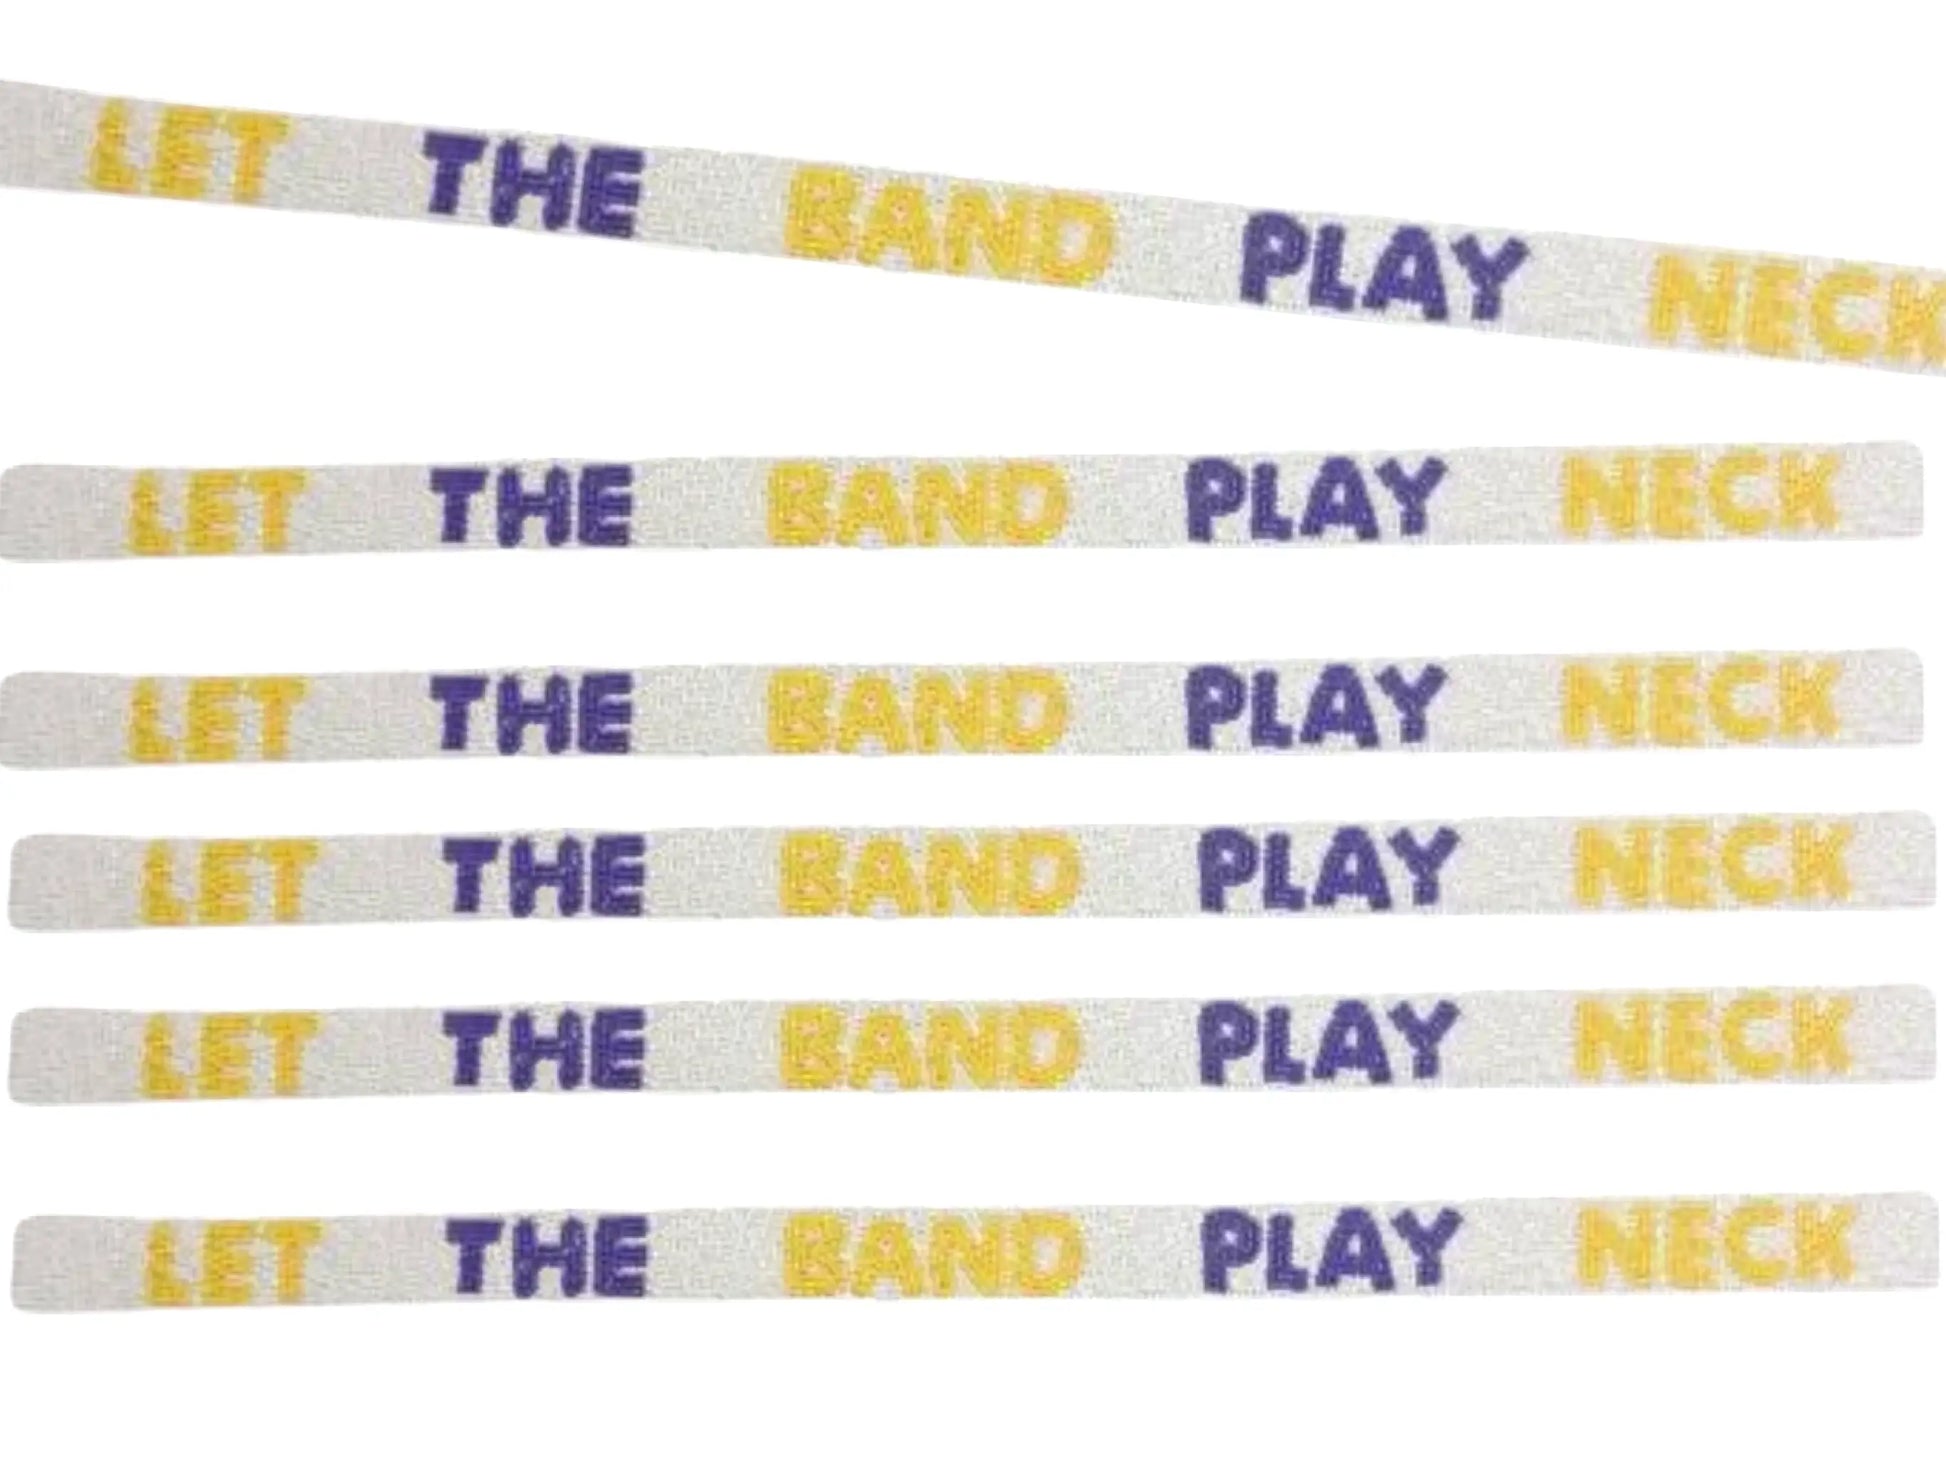 We provide Beaded Purse Strap - Purple/Gold Louisiana Saturday Night Tru  Colors Gameday for our customers who are valued for a low cost, with a high  level of service